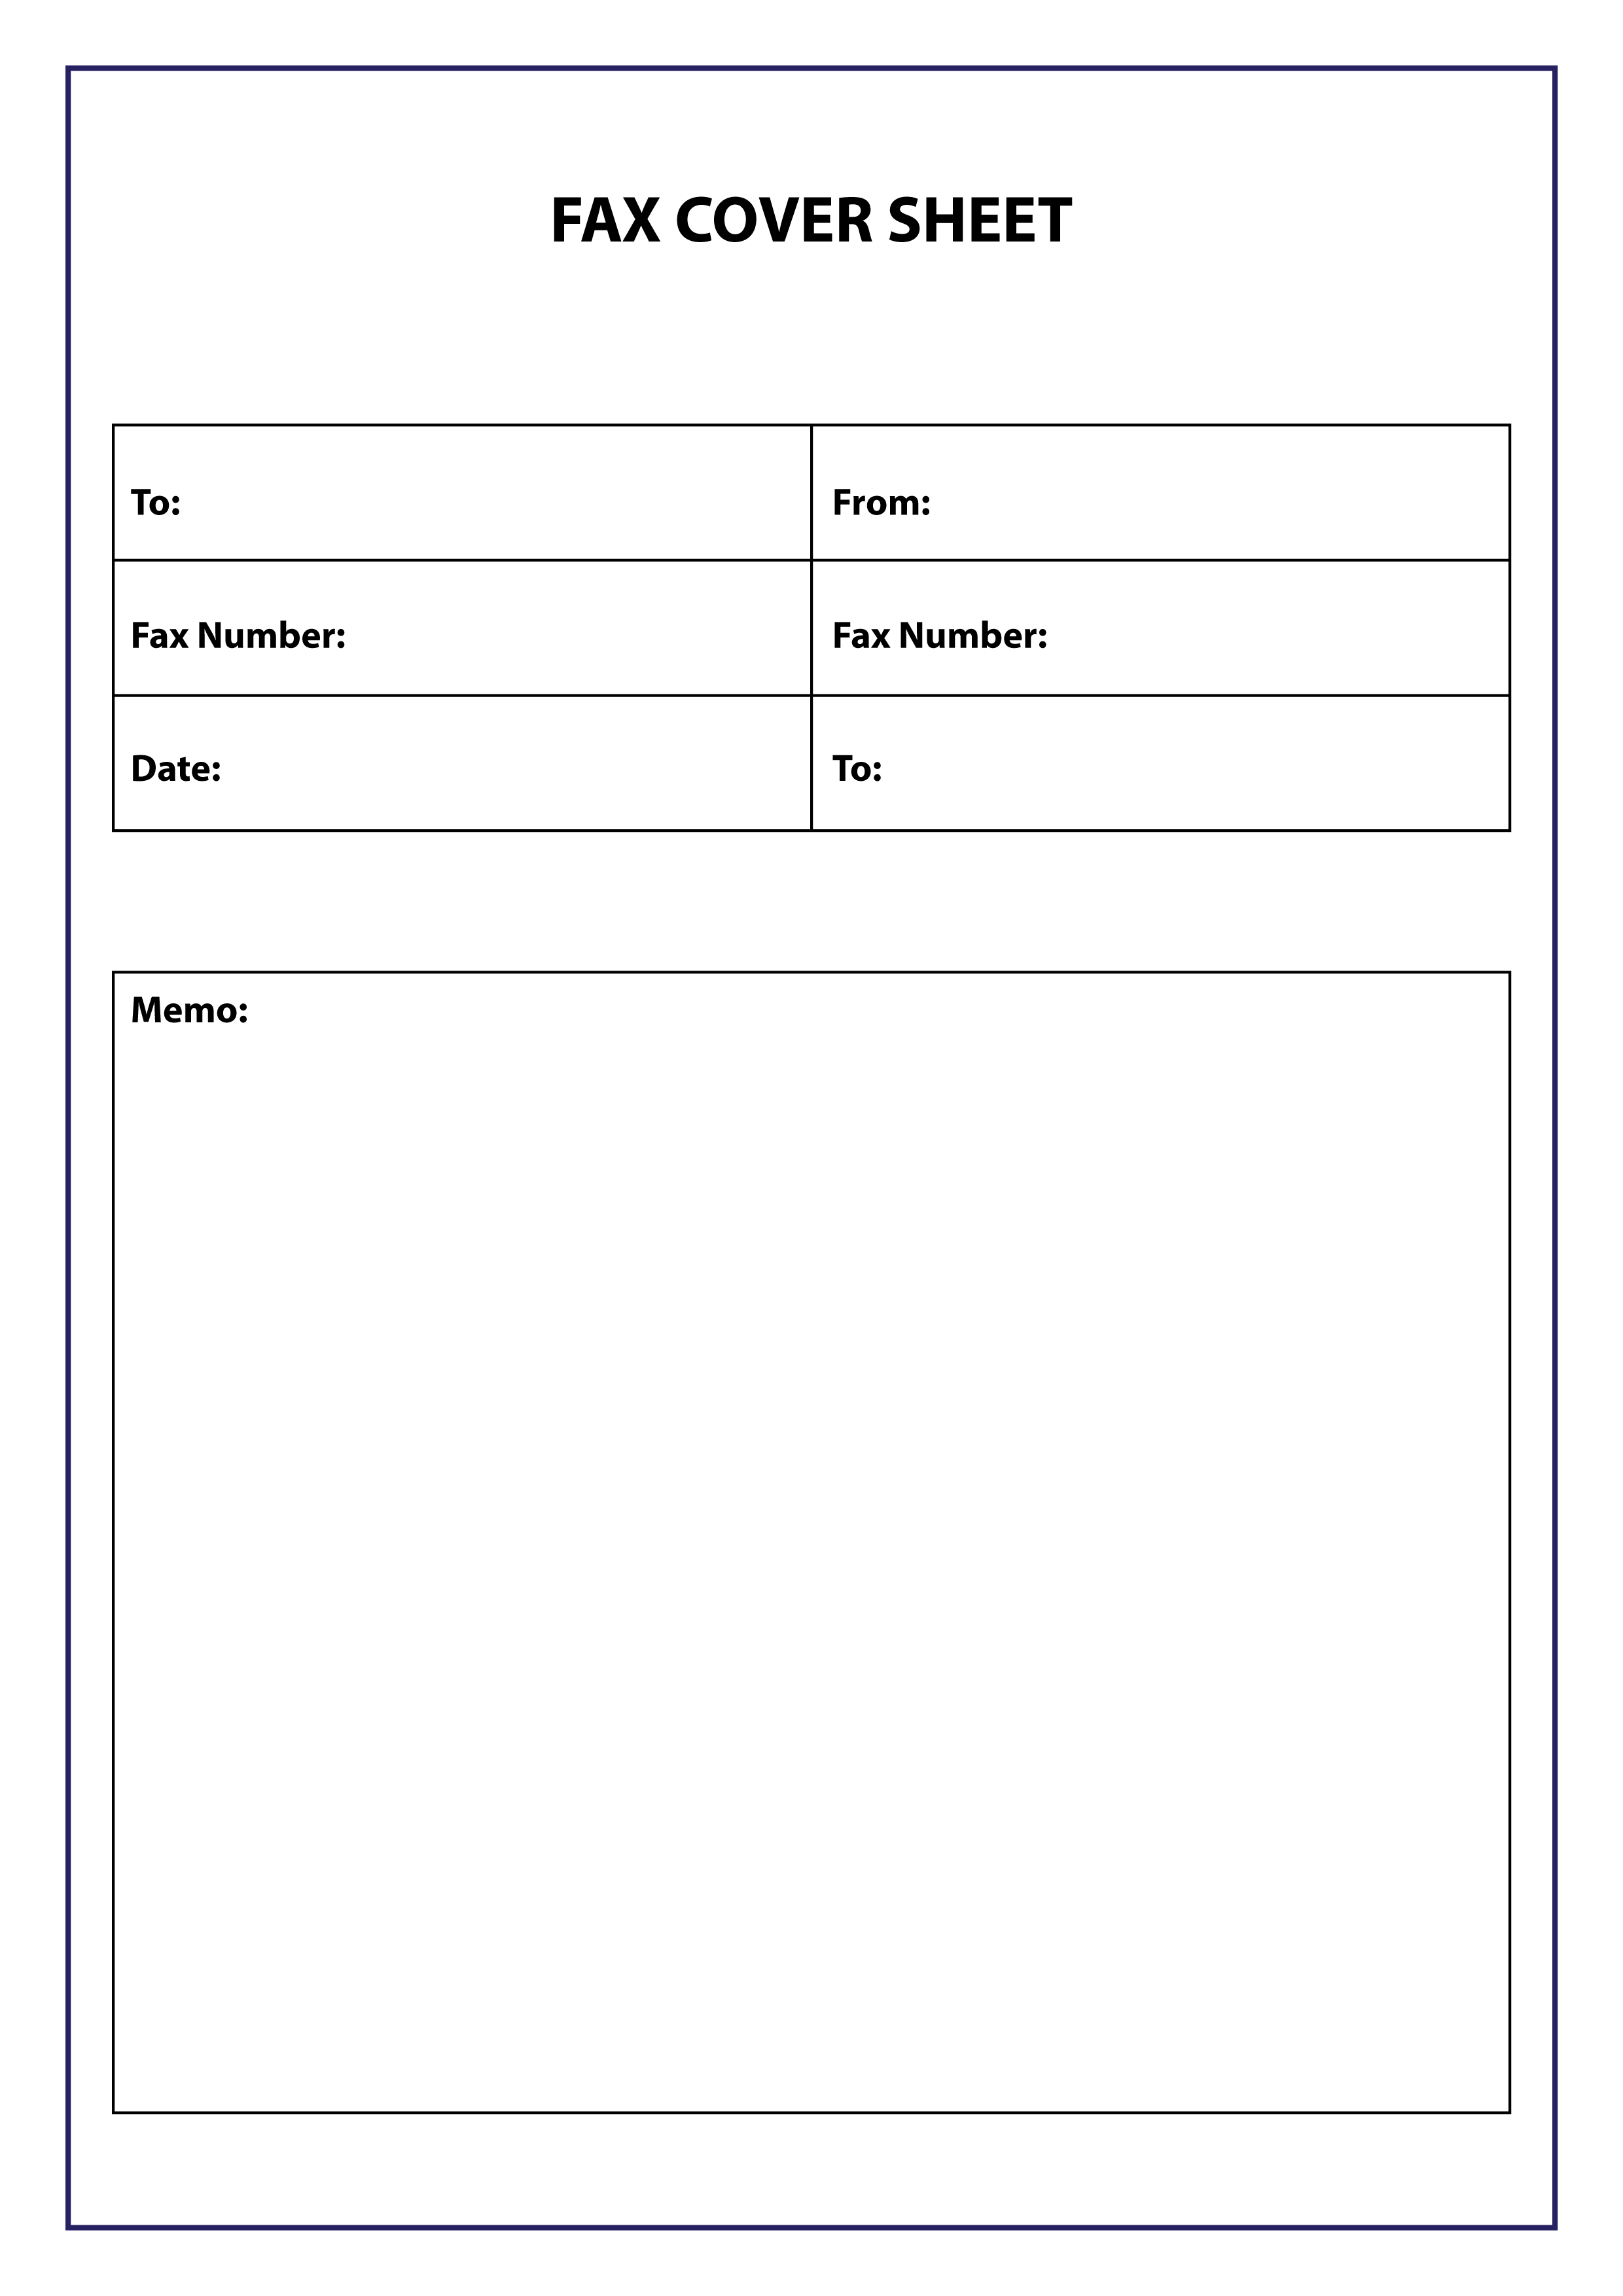 Free Basic Fax Cover Sheet Template {PDF, Word}